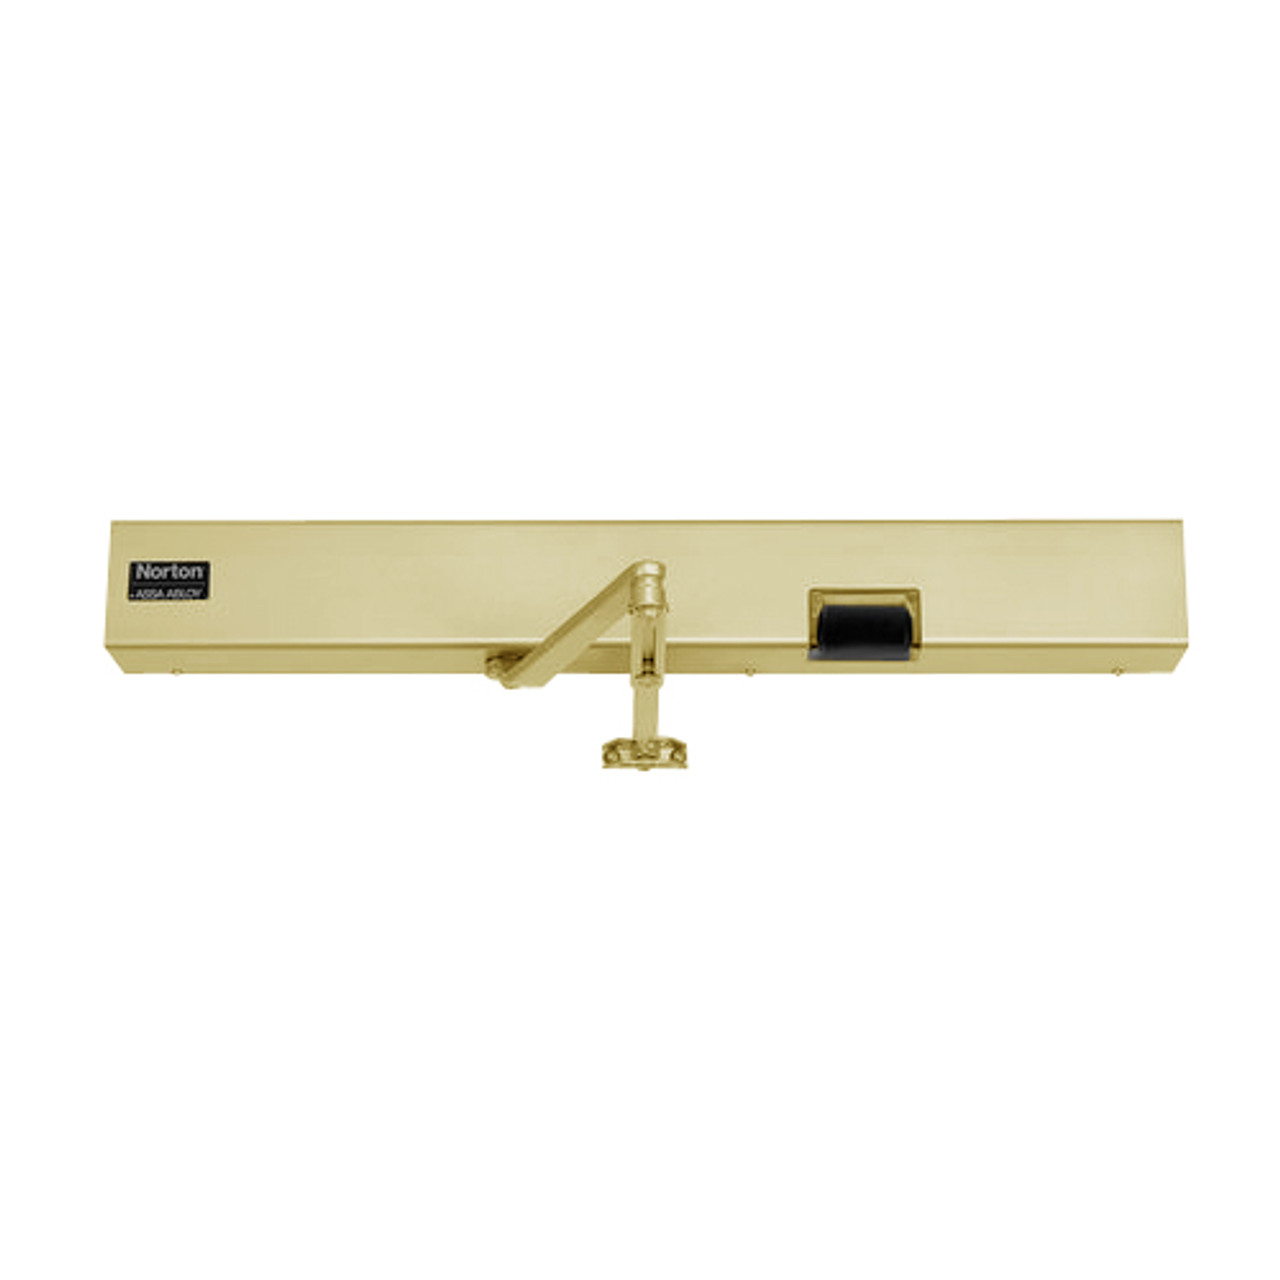 7122SZ-DZ-LH-120VAC-696 Norton 7100SZ Series Safe Zone Multi-Point Closer/Holder with Motion Sensor and Push Side Double Lever 11 inch Main Arm in Gold Finish